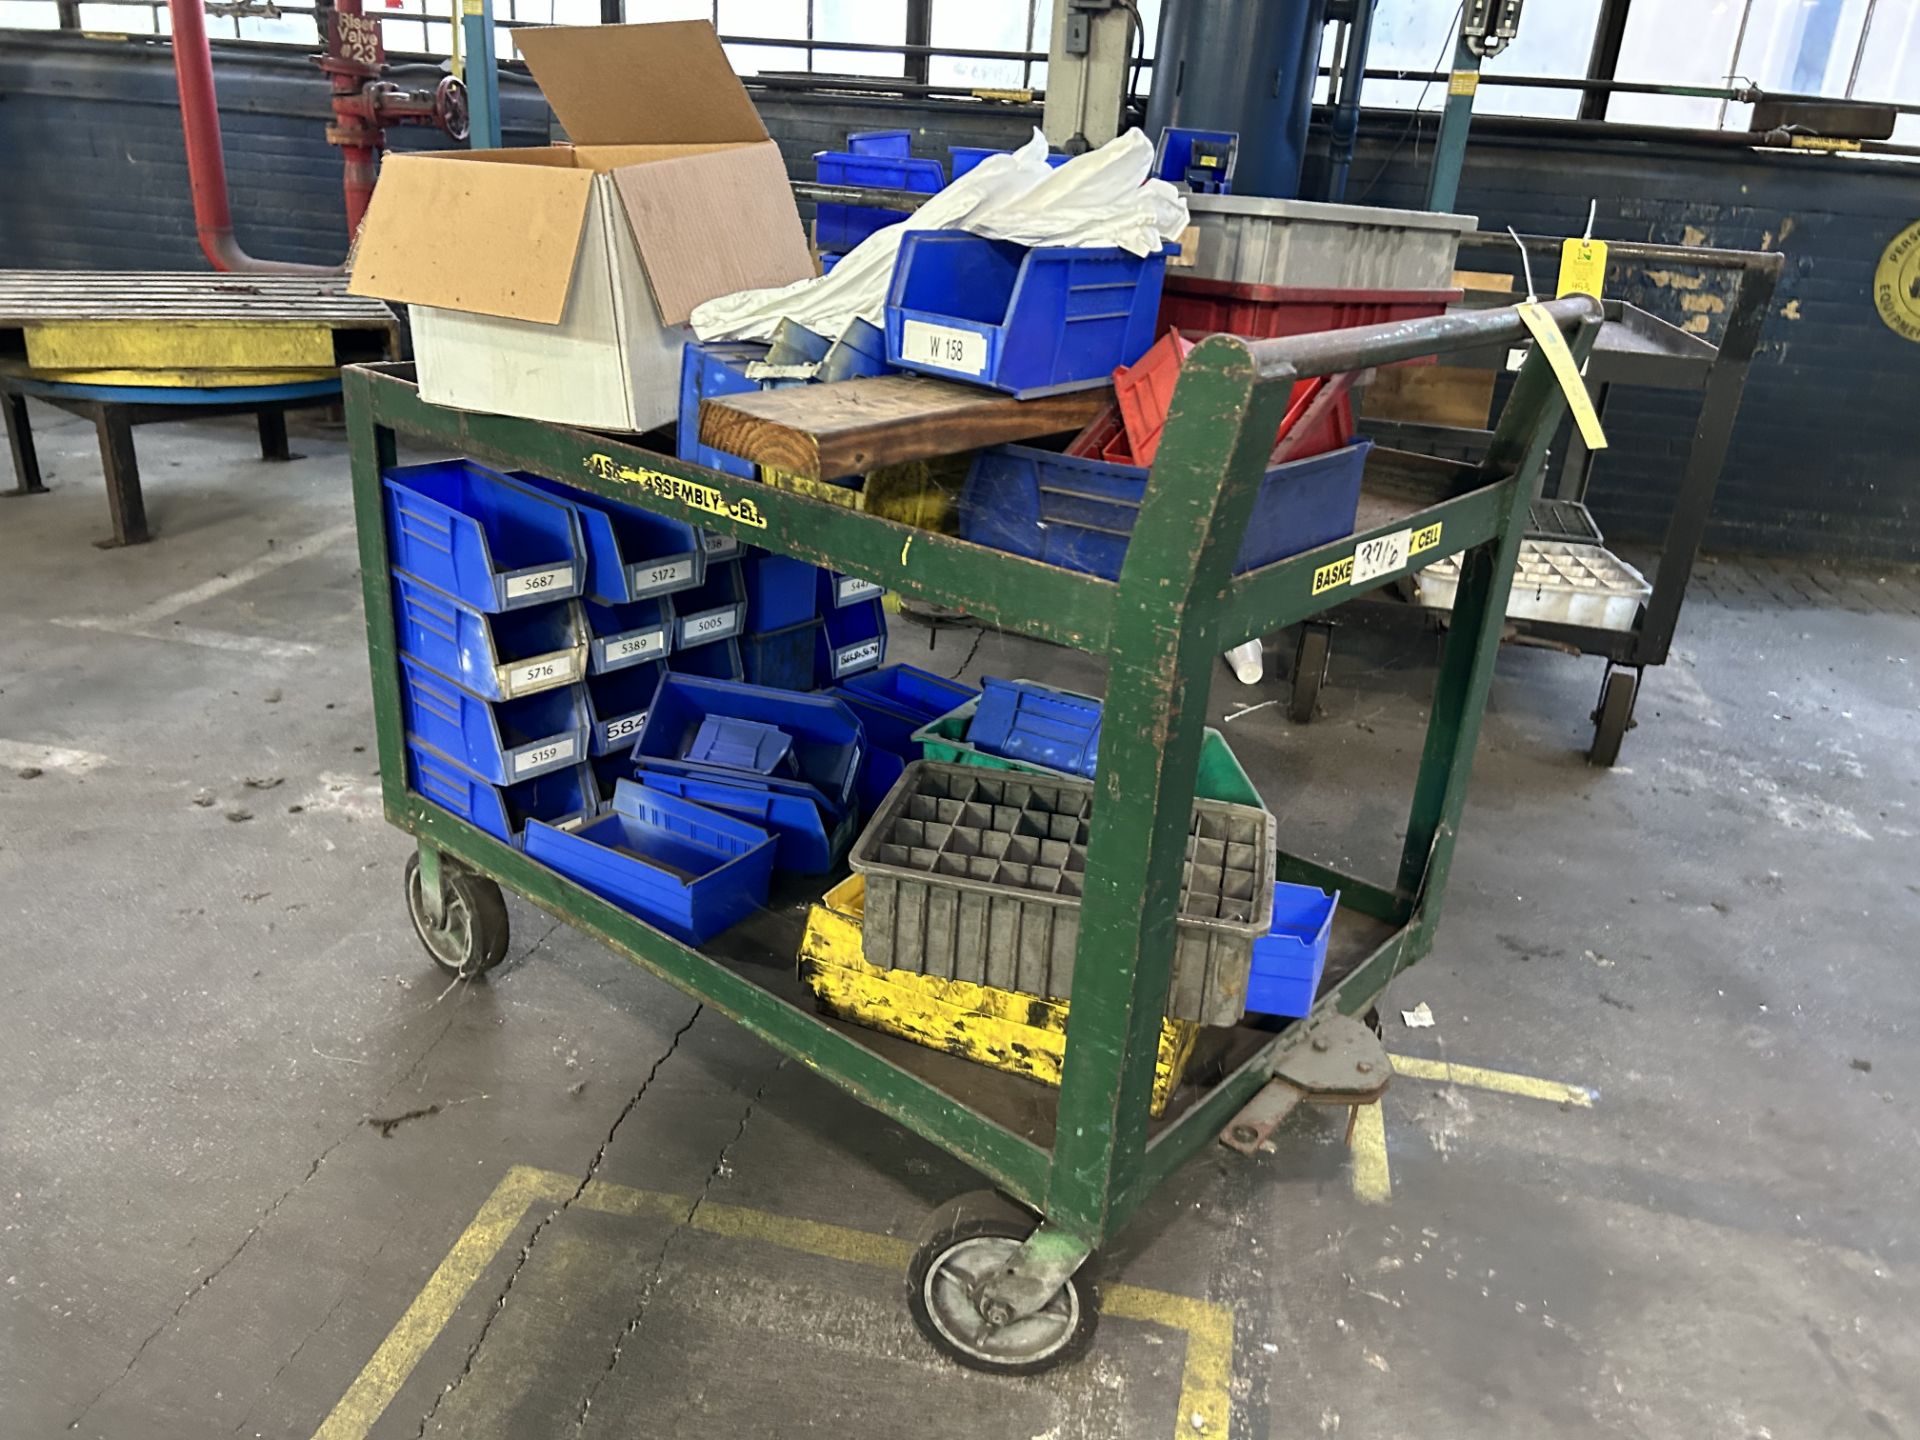 Shop Cart, Rigging/ Removal Fee - $35 - Image 2 of 3